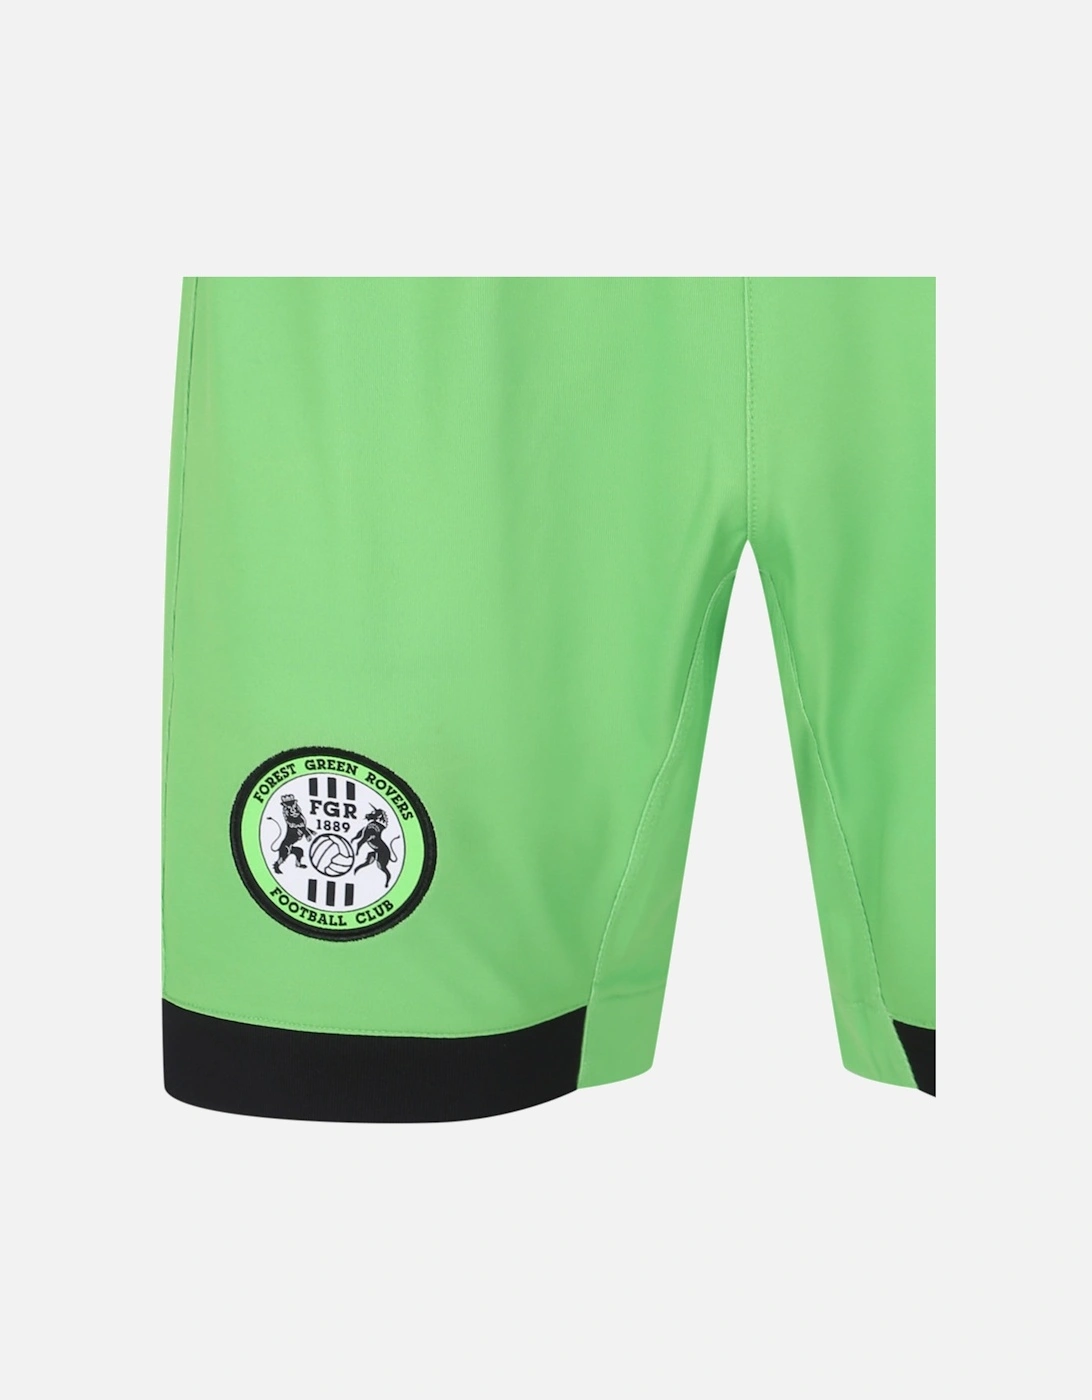 Mens 23/24 Forest Green Rovers FC Home Shorts